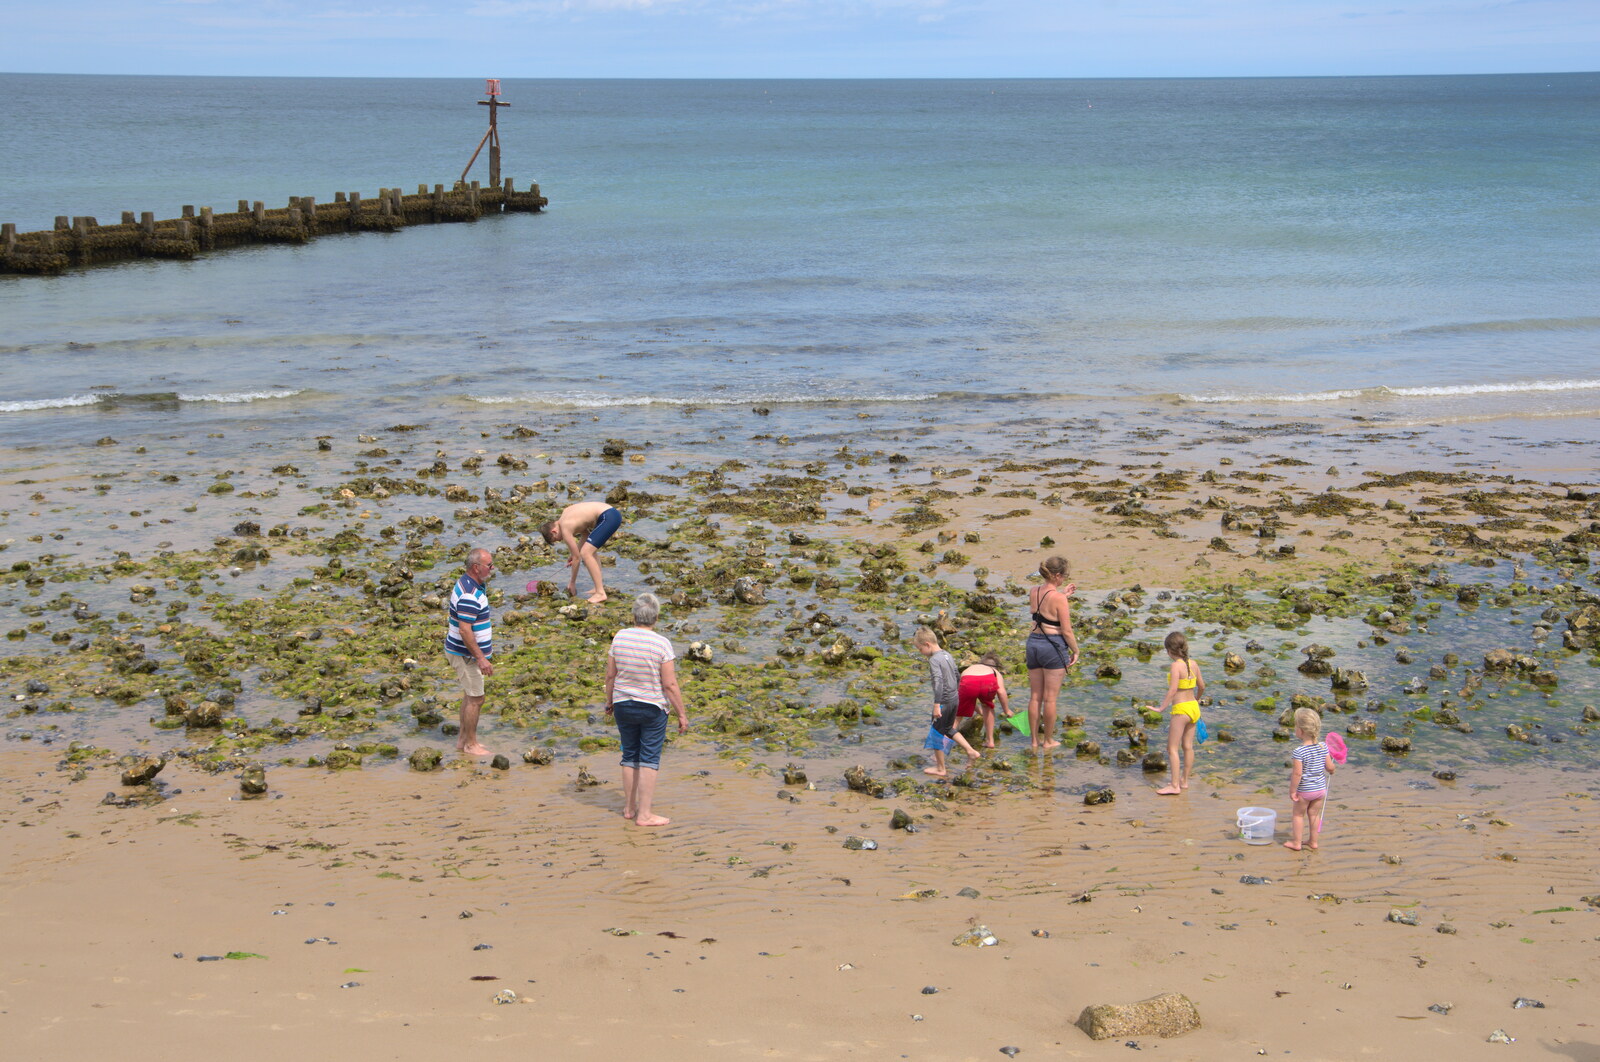 Rock pooling as the tide has gone out from Camping on the Coast, East Runton, North Norfolk - 25th July 2020